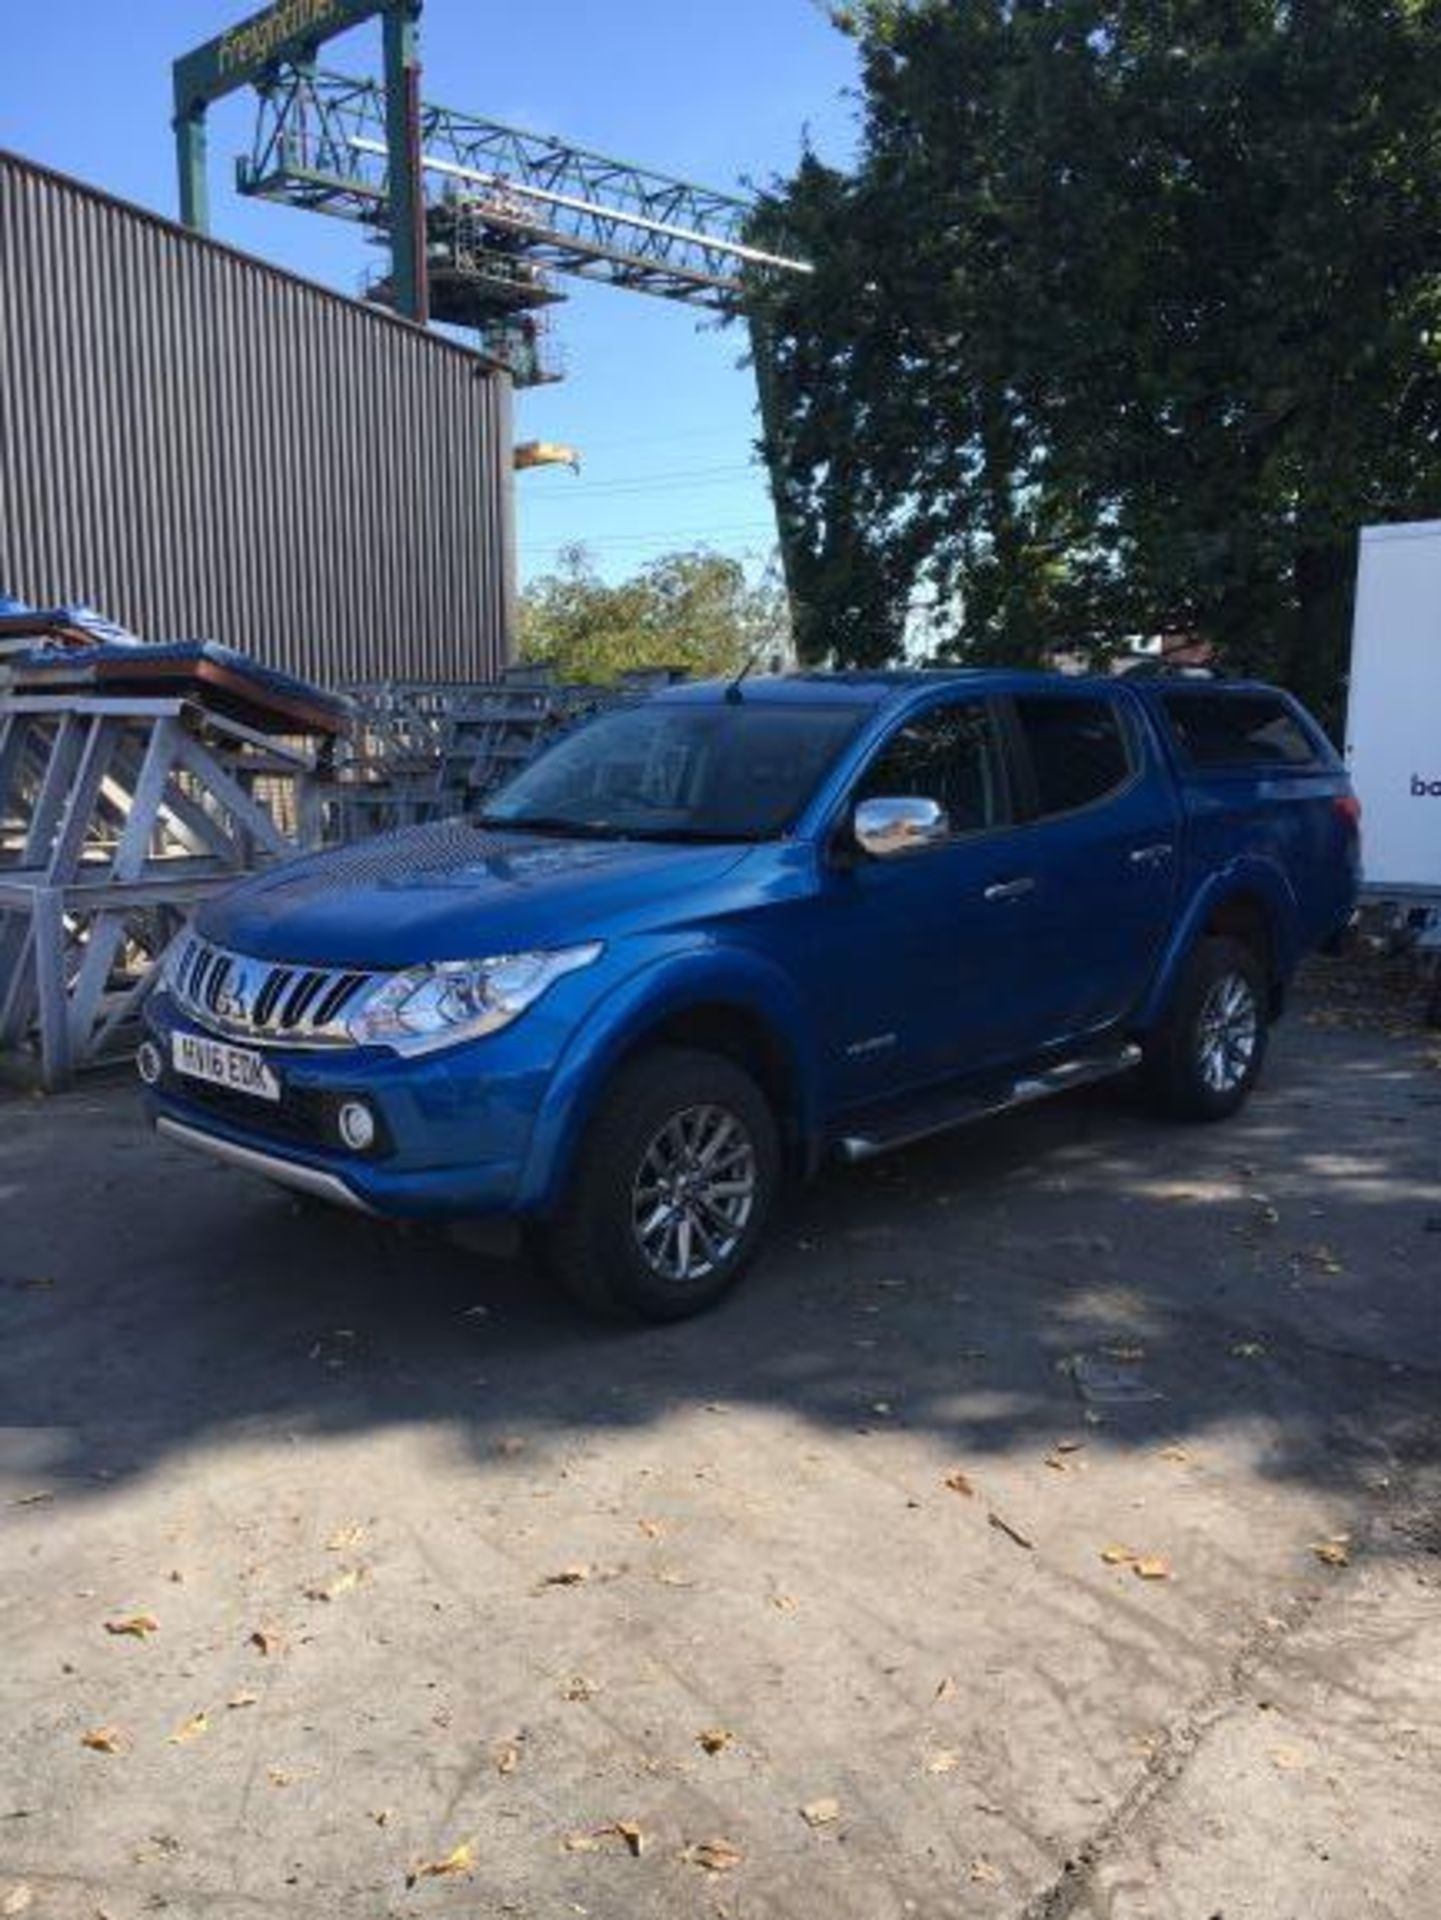 Mitsubishi L200 DCB Di-D Warrior Diesel Auto twin cab pickup with hard top Registration No. HV16 EDK - Image 2 of 10